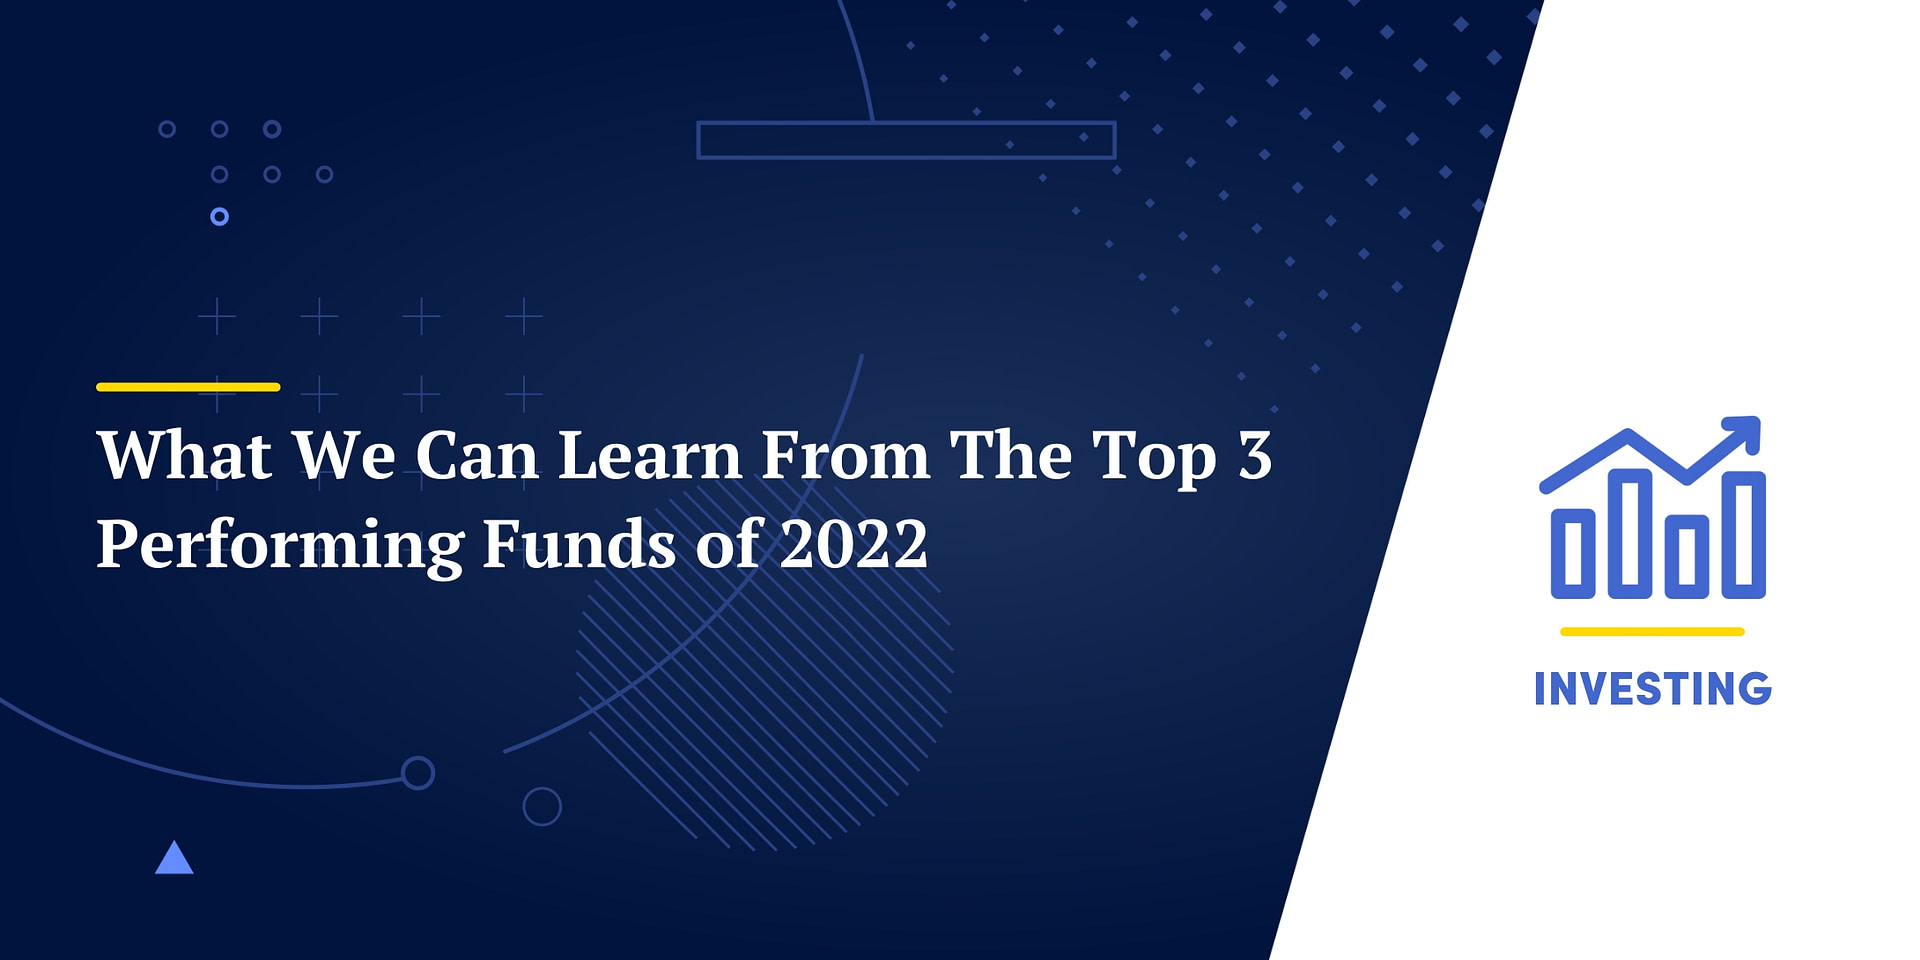 What We Can Study From The High 3 Performing Funds of 2022